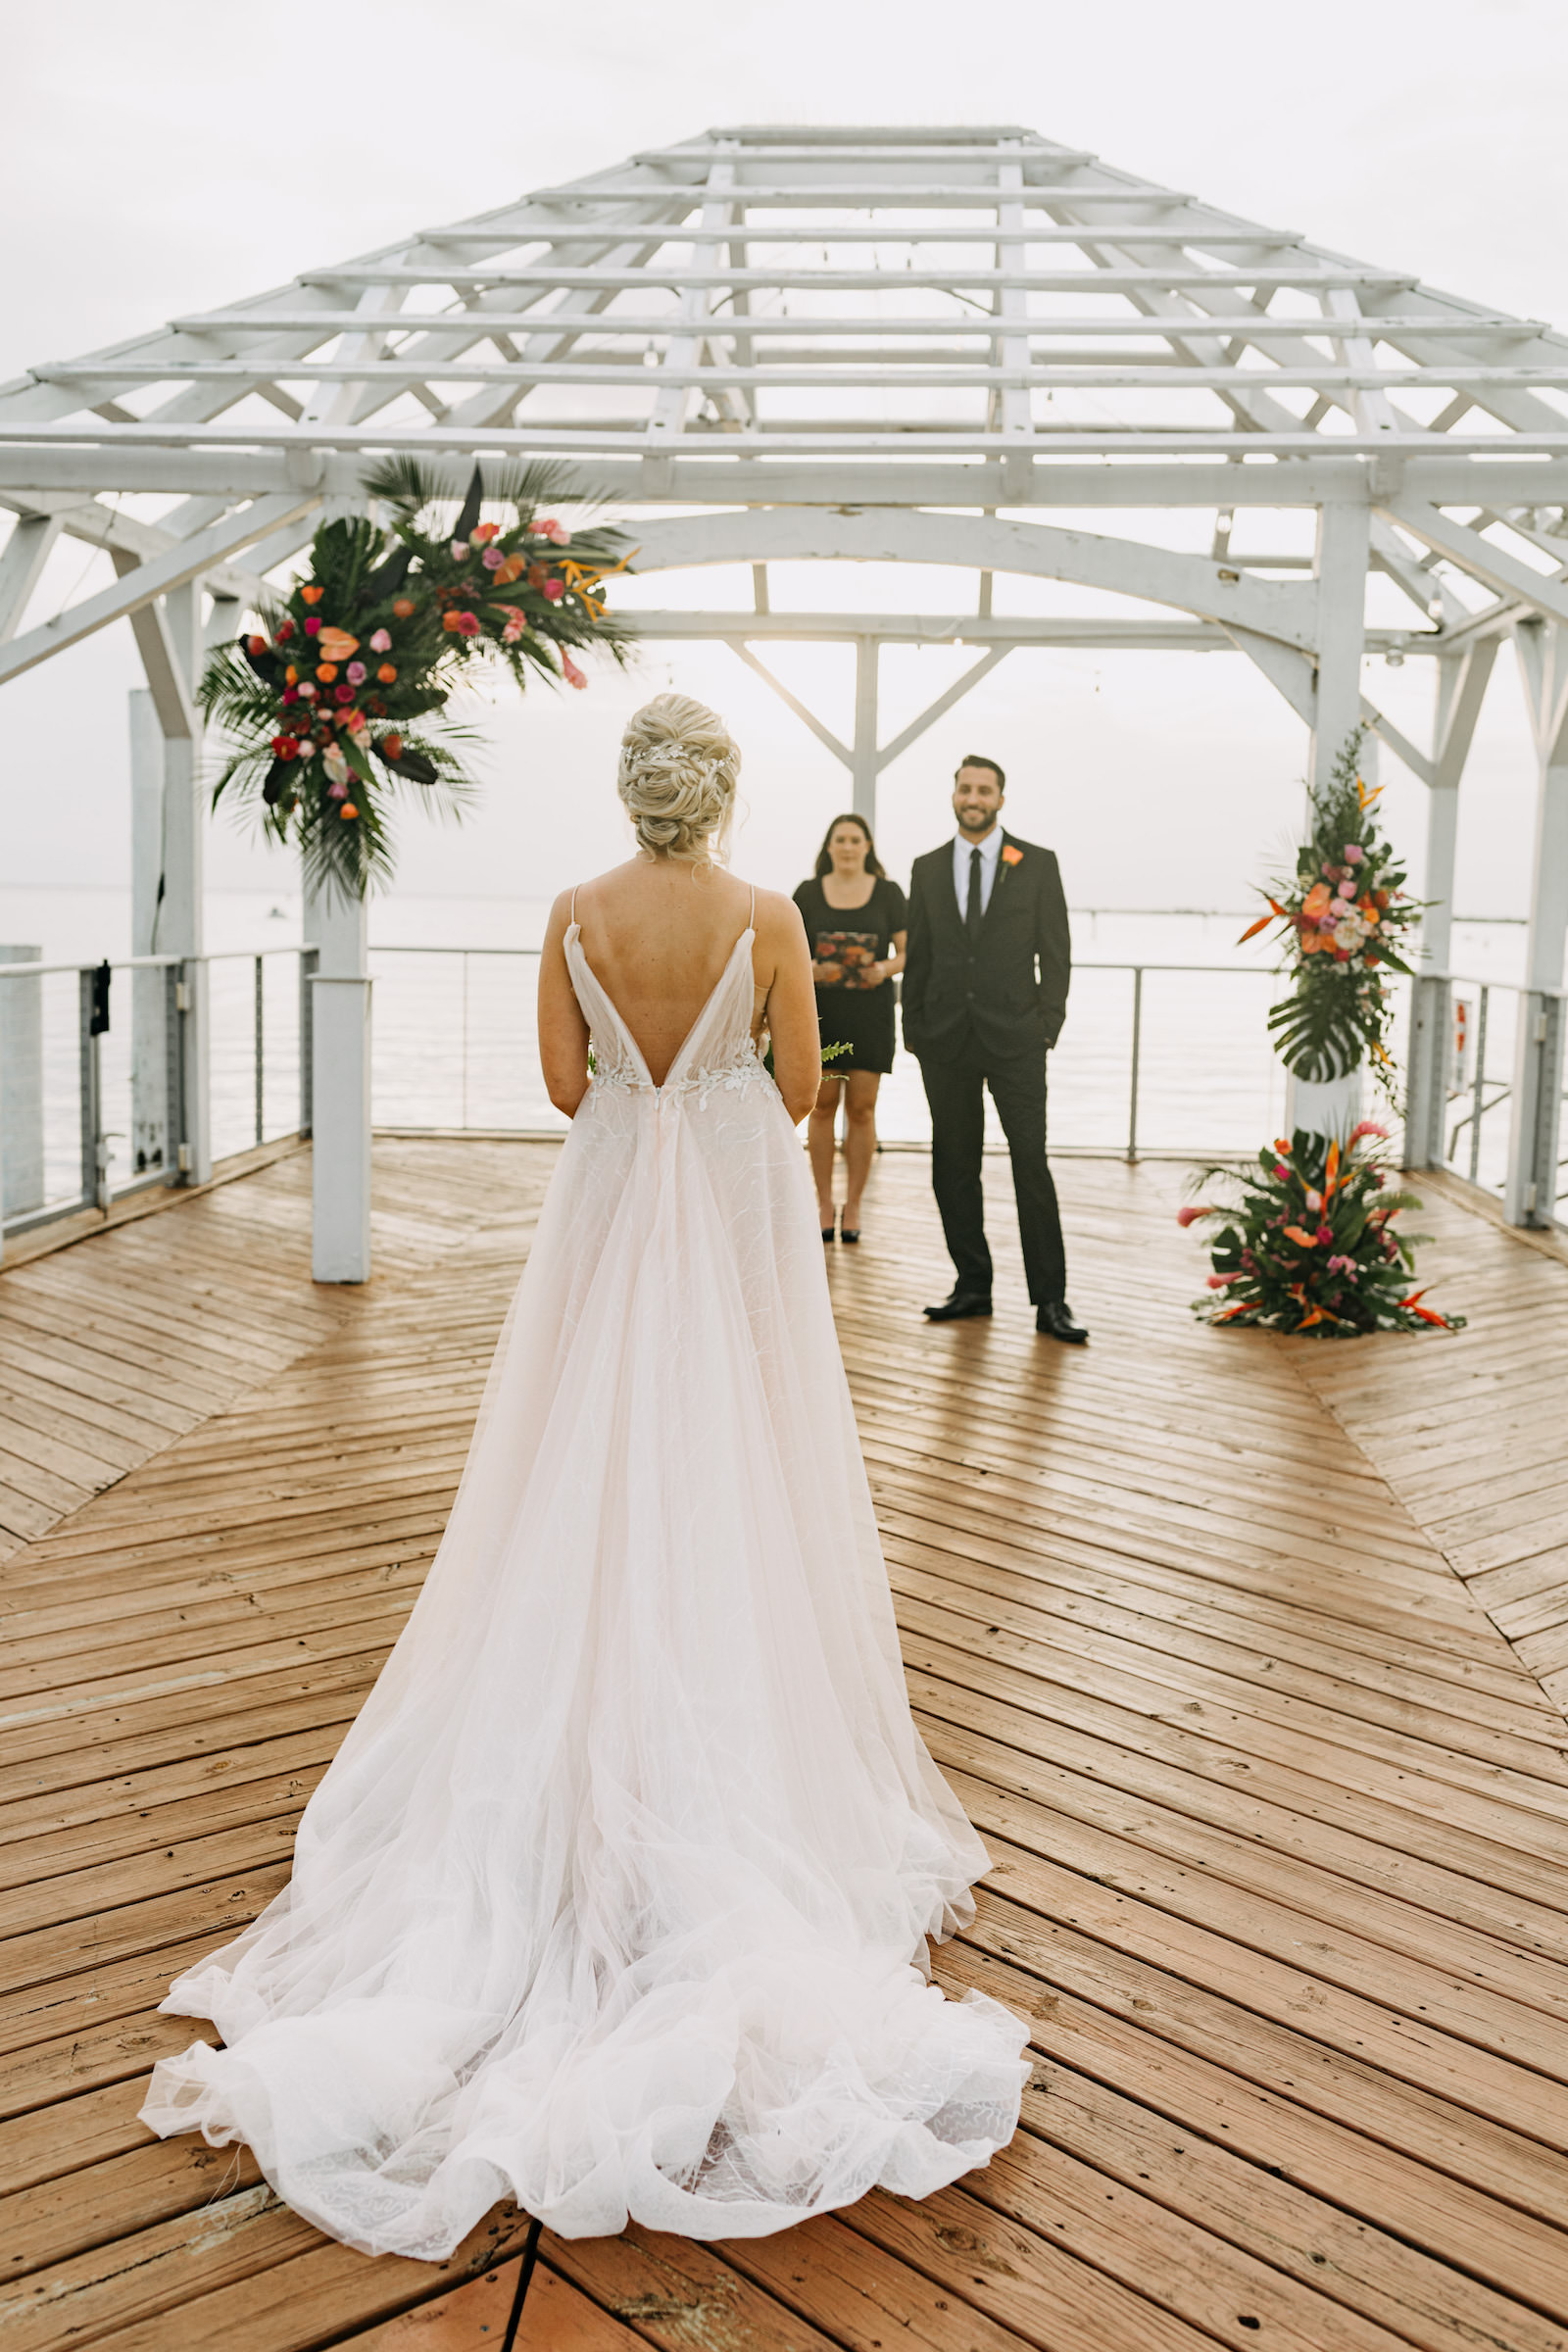 Bride Wearing Romantic Flowy Boho Wedding Dress, Open V Back, Groom and Officiant on Waterfront Pier, Tropical Styled Shoot | Tampa Bay Wedding Venue The Godfrey | Wedding Planner Elope Tampa Bay | Wedding Dress Nikki's Glitz and Glam | Wedding Florist Brides N Blooms | Amber McWhorter Photography